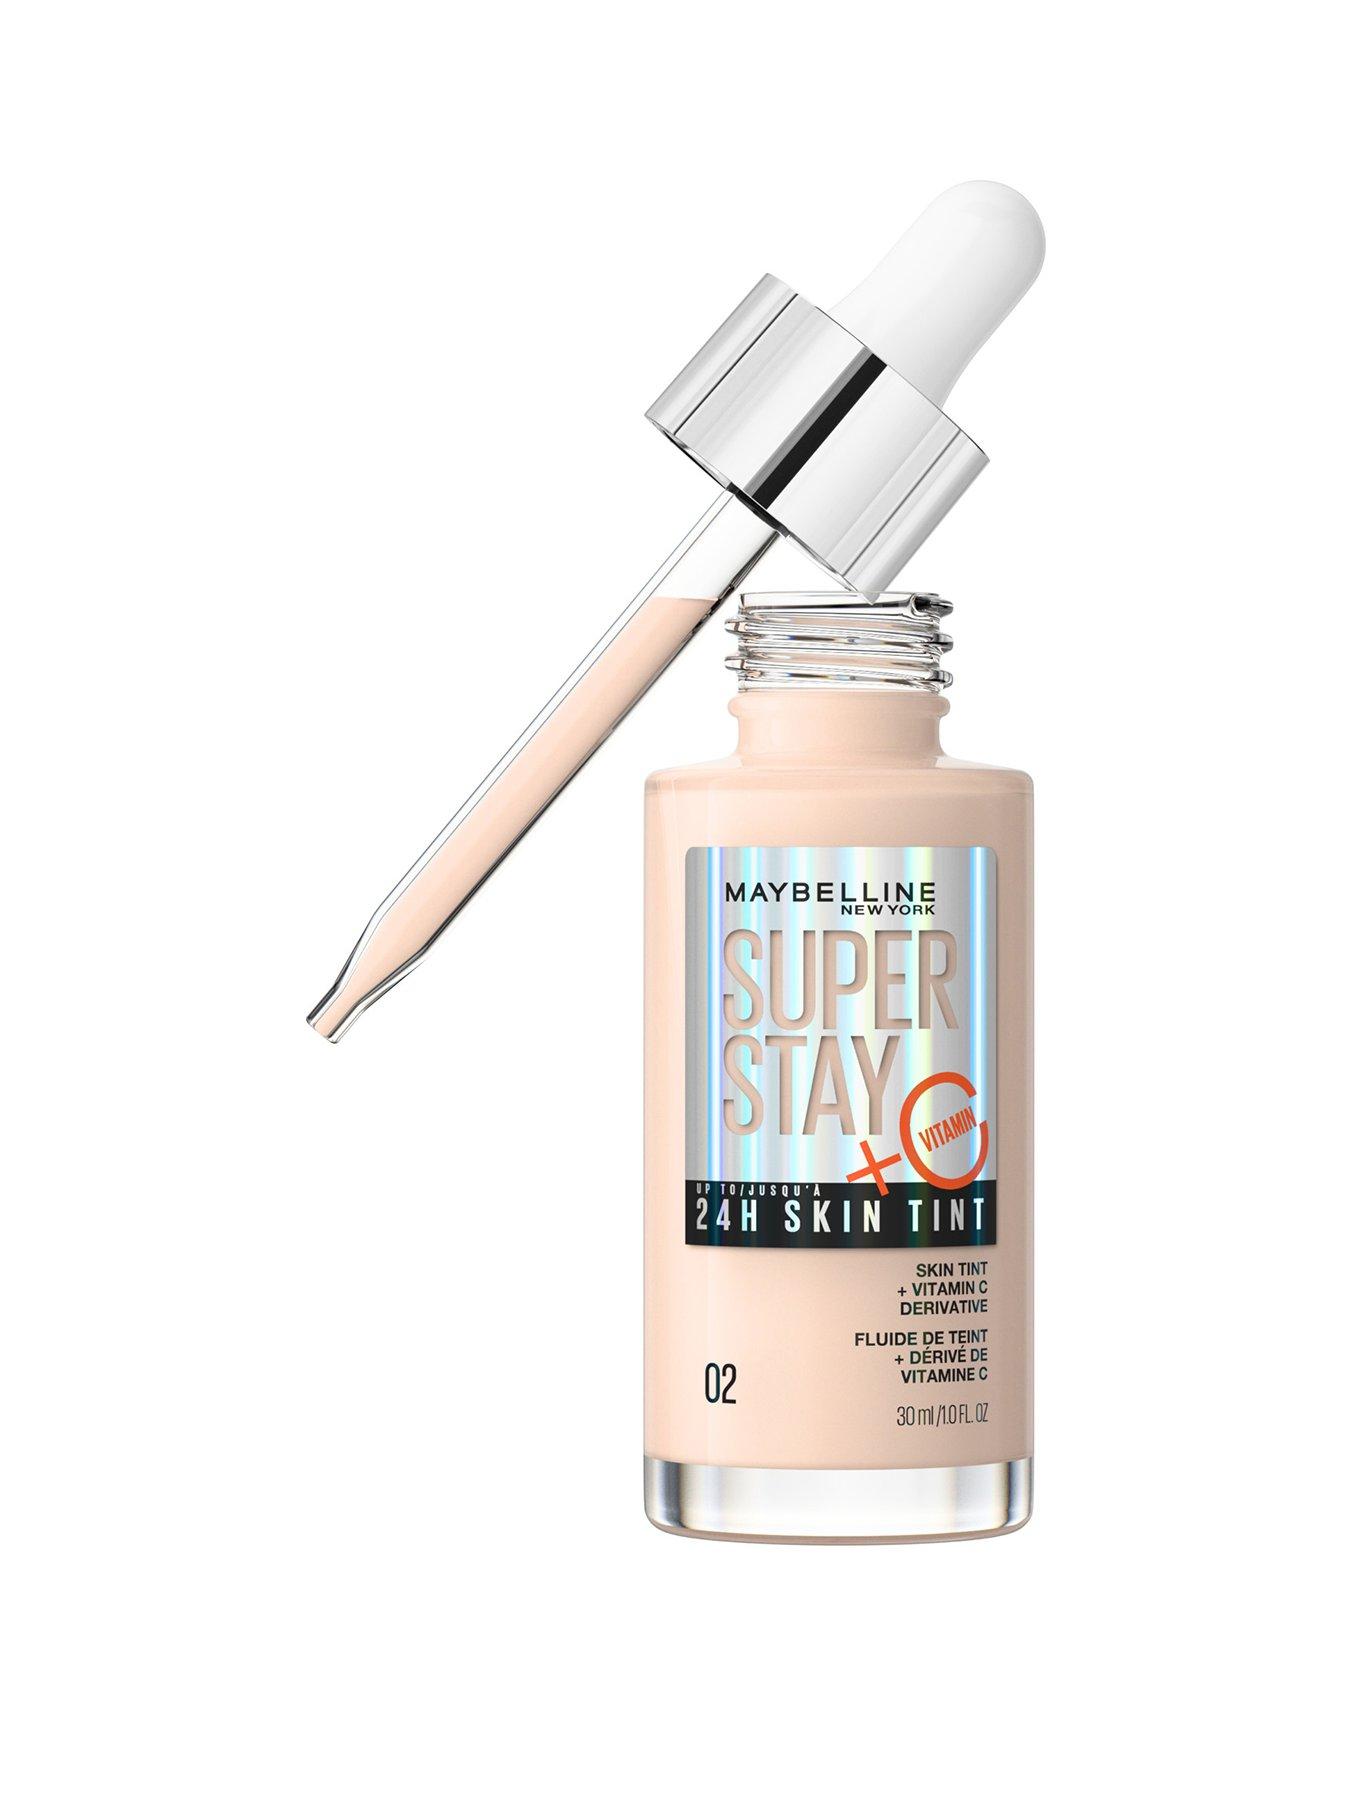  Maybelline Super Stay Up to 24HR Skin Tint, Radiant  Light-to-Medium Coverage Foundation, Makeup Infused With Vitamin C, 129, 1  Count : Beauty & Personal Care